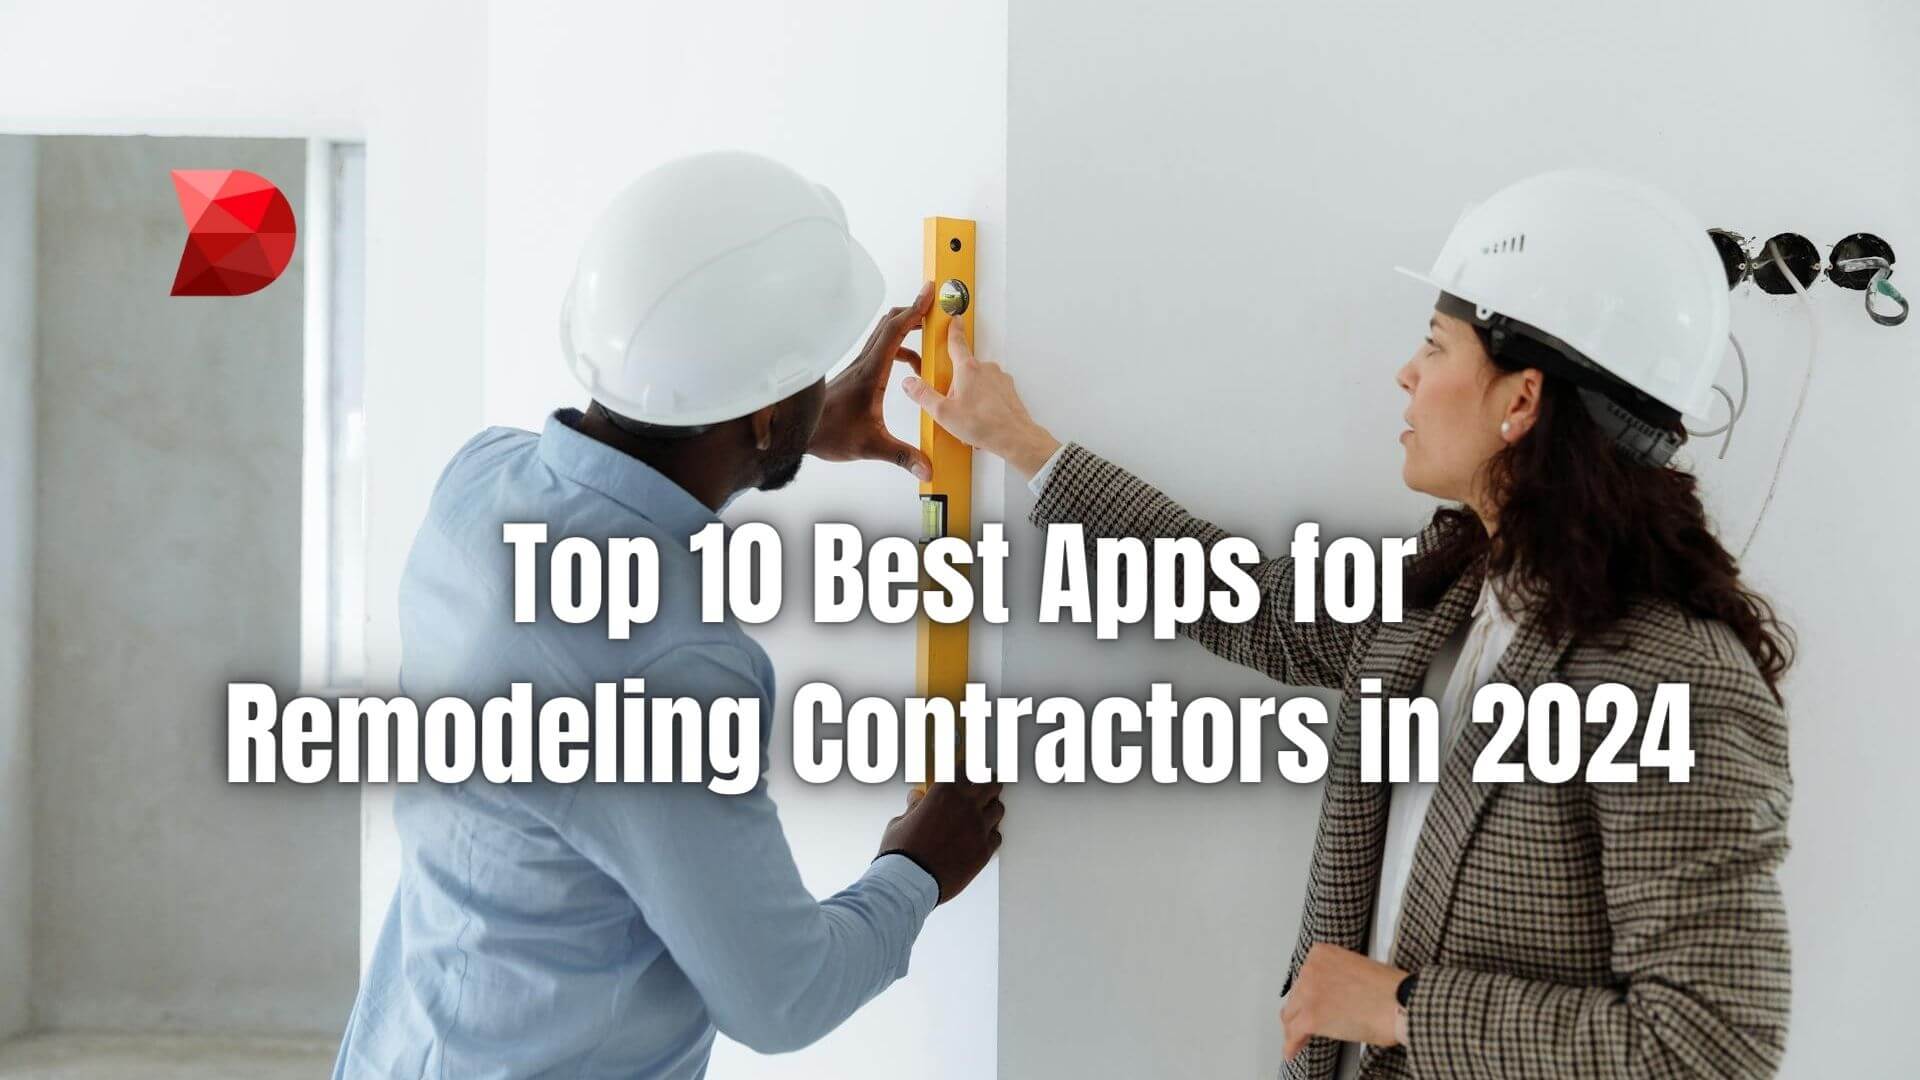 We review ten of the best home improvement and remodeling apps for contractors available across all devices. Read here to learn more.